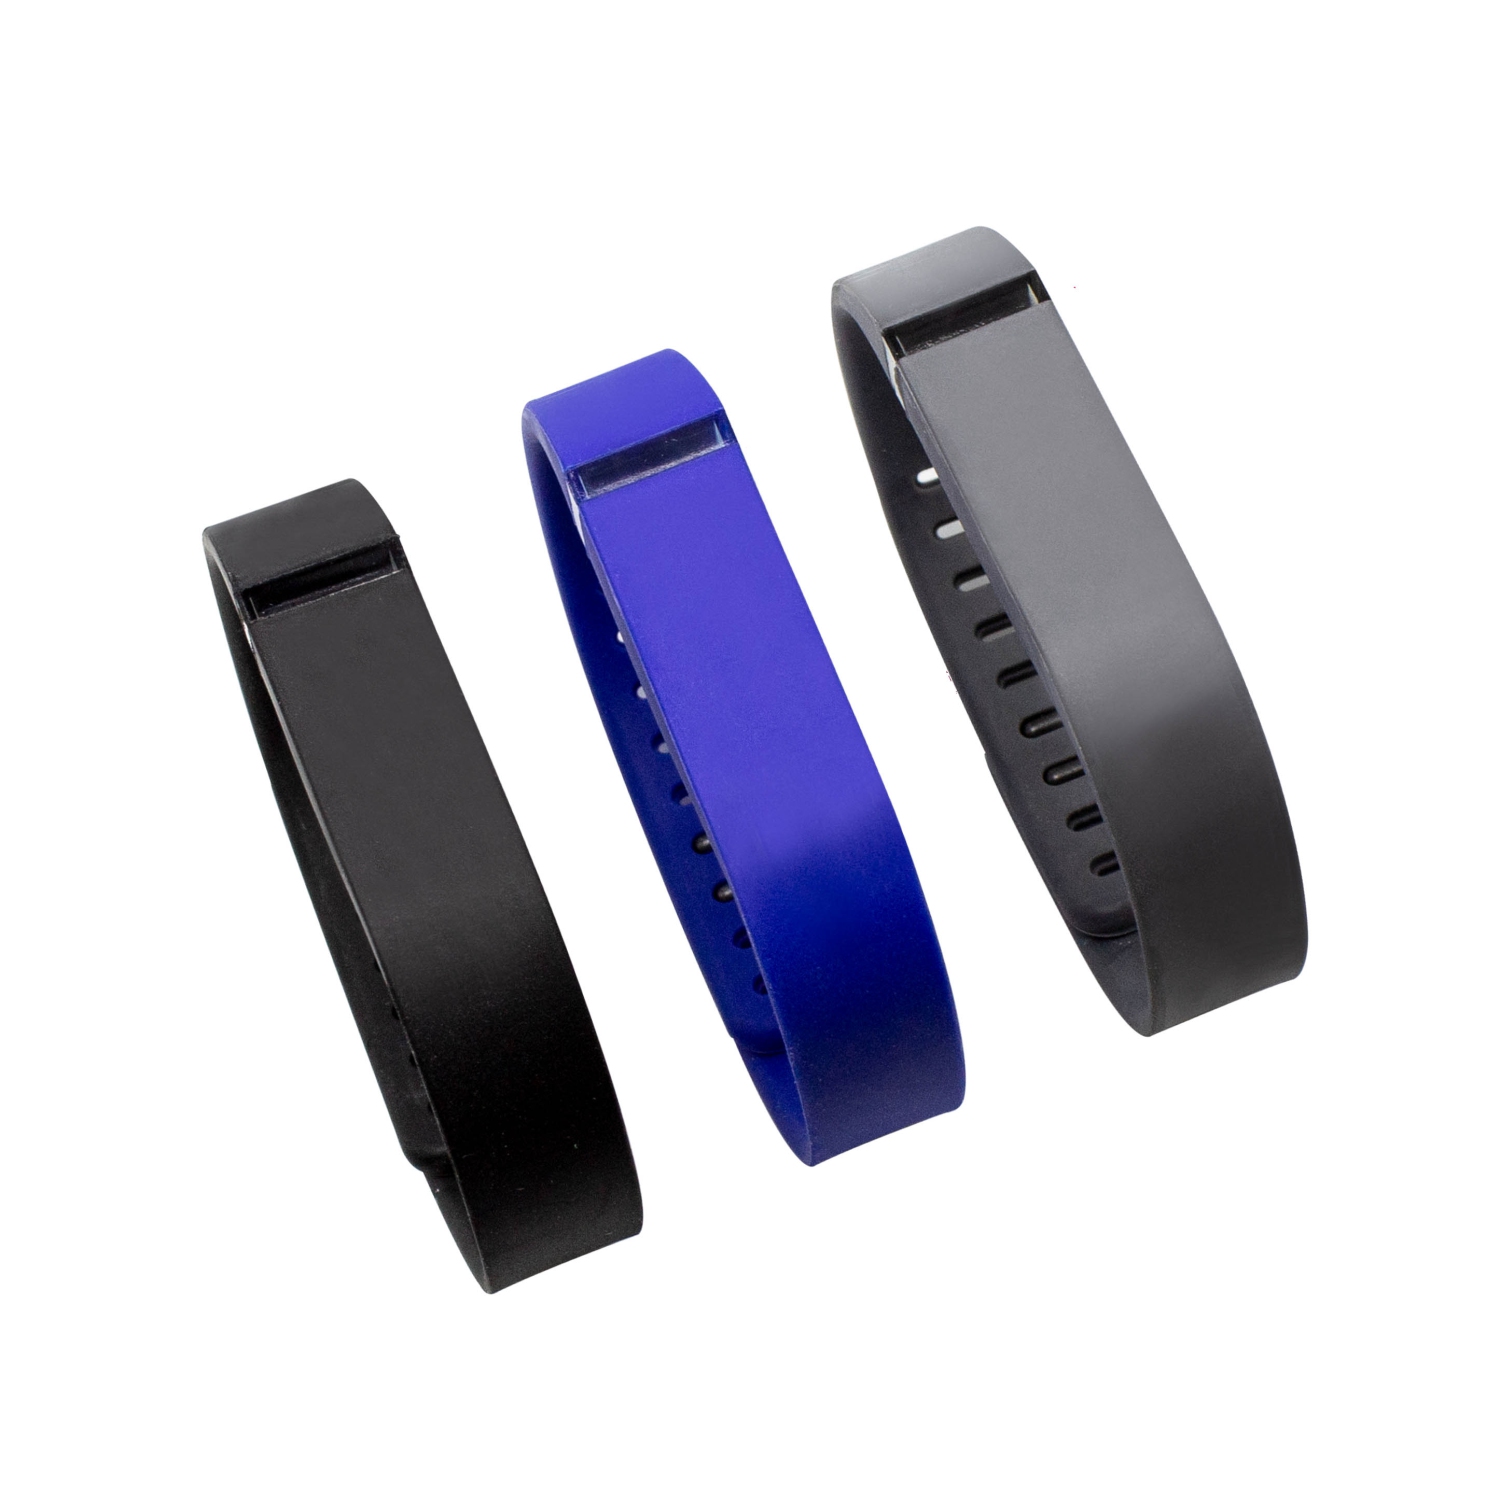 Adreama Silicone Replacement Band for Fitbit Flex - 3 pack (Gray/ Blue/ Black)